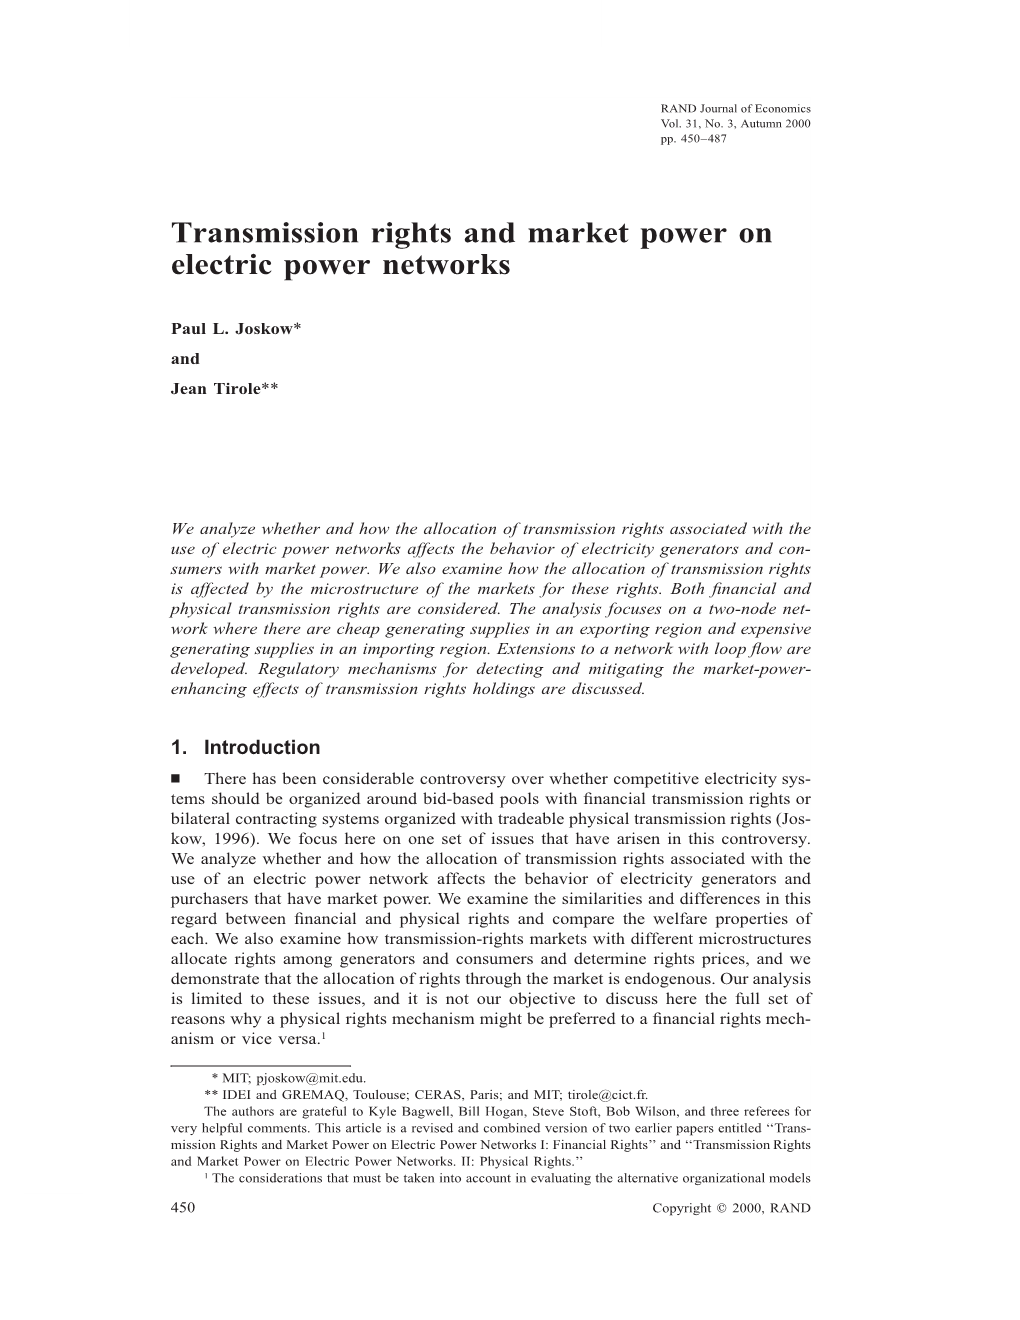 Transmission Rights and Market Power on Electric Power Networks